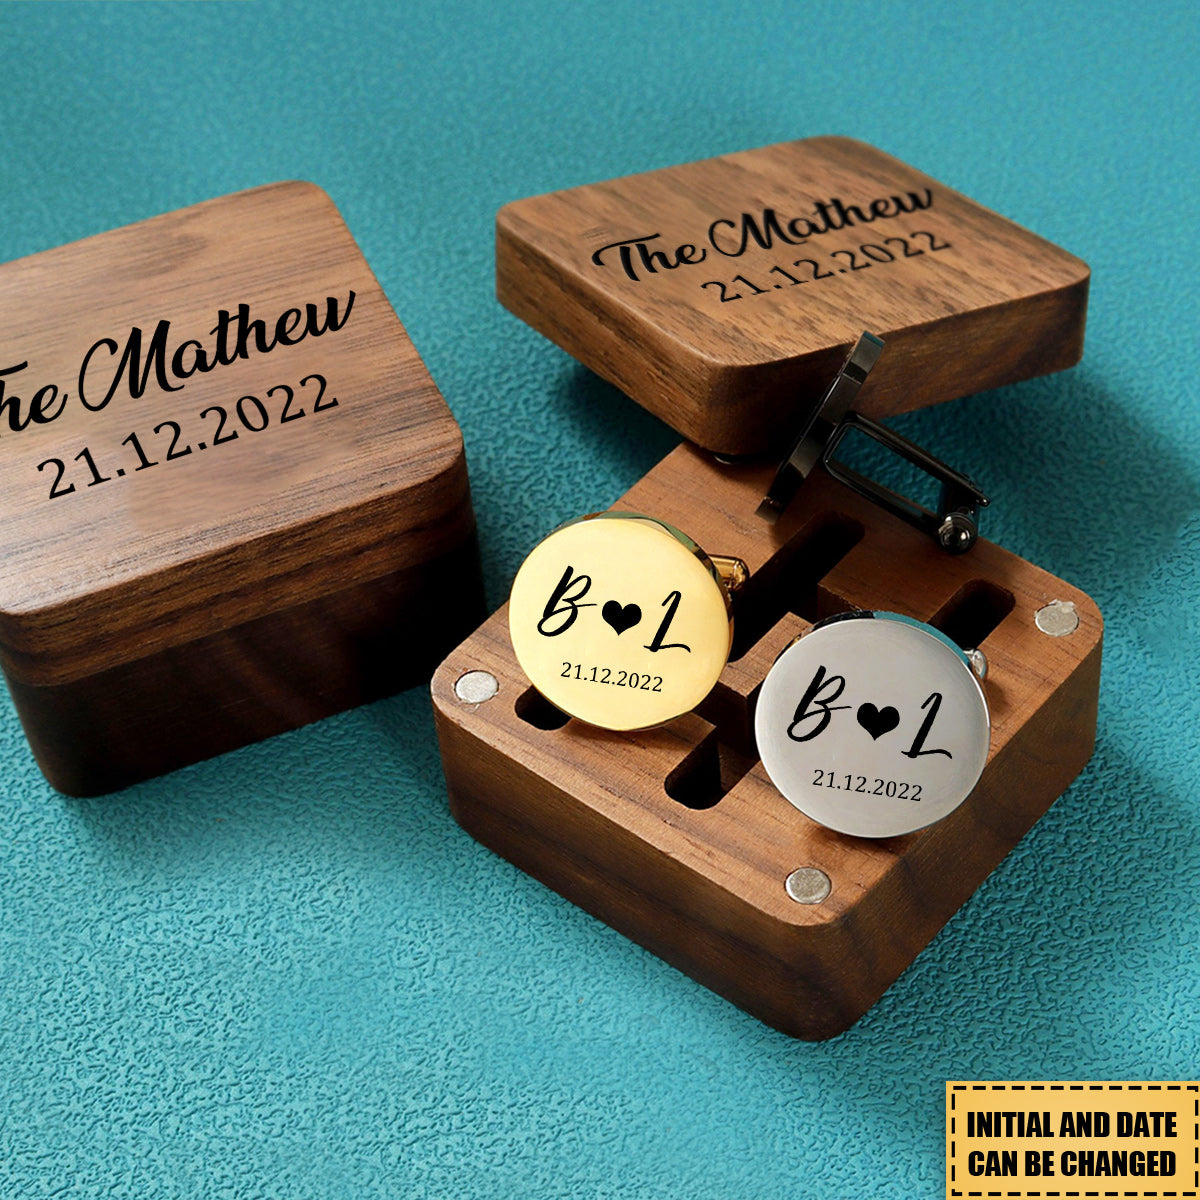 The Mathew - Personalized Cufflinks - Gift for Him